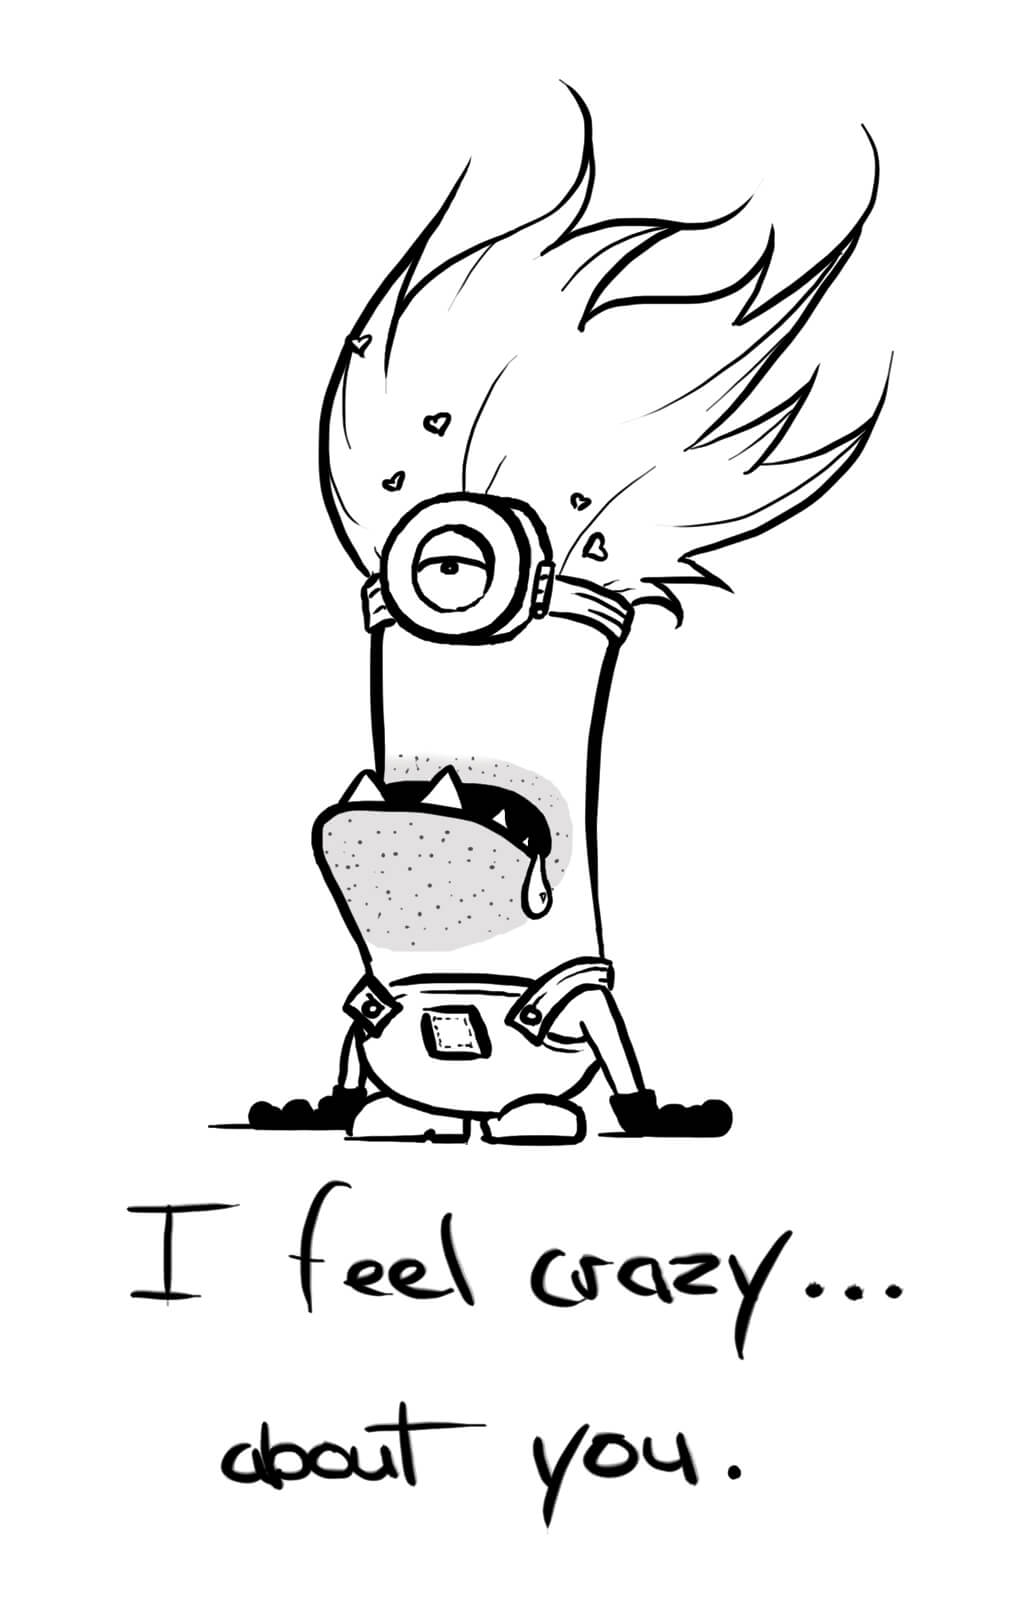 black and white photoshop of a minion with 'im crazy about you text'